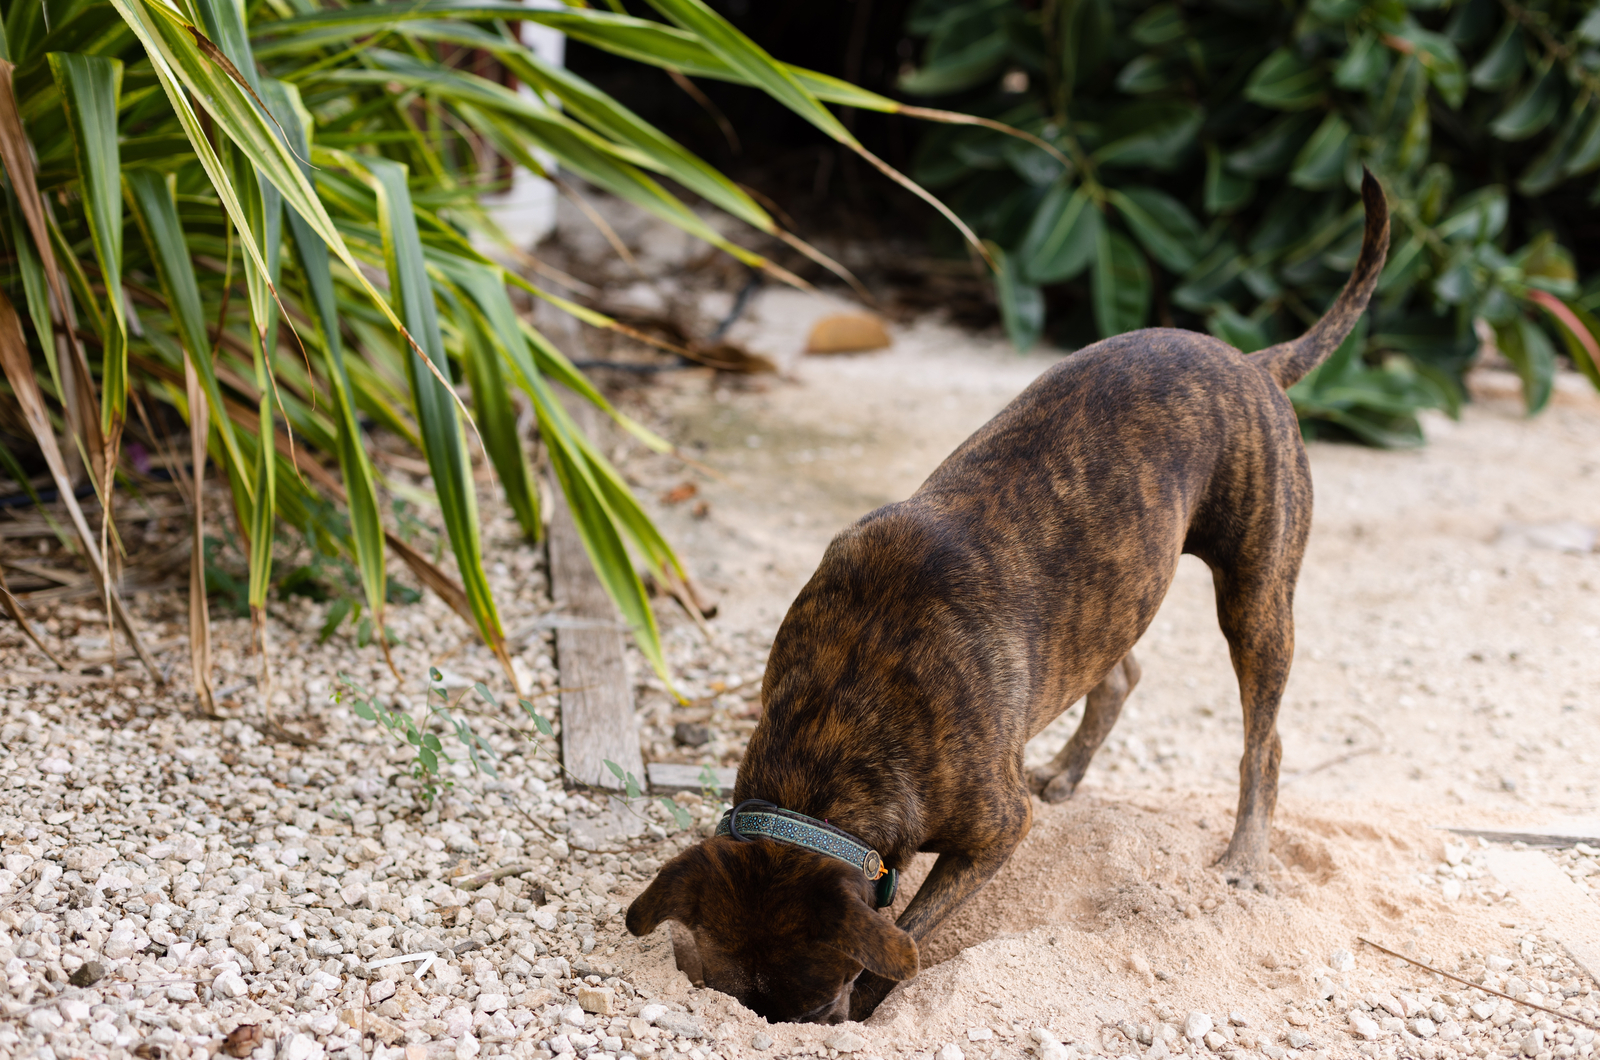 Dog is digging hole in a garden